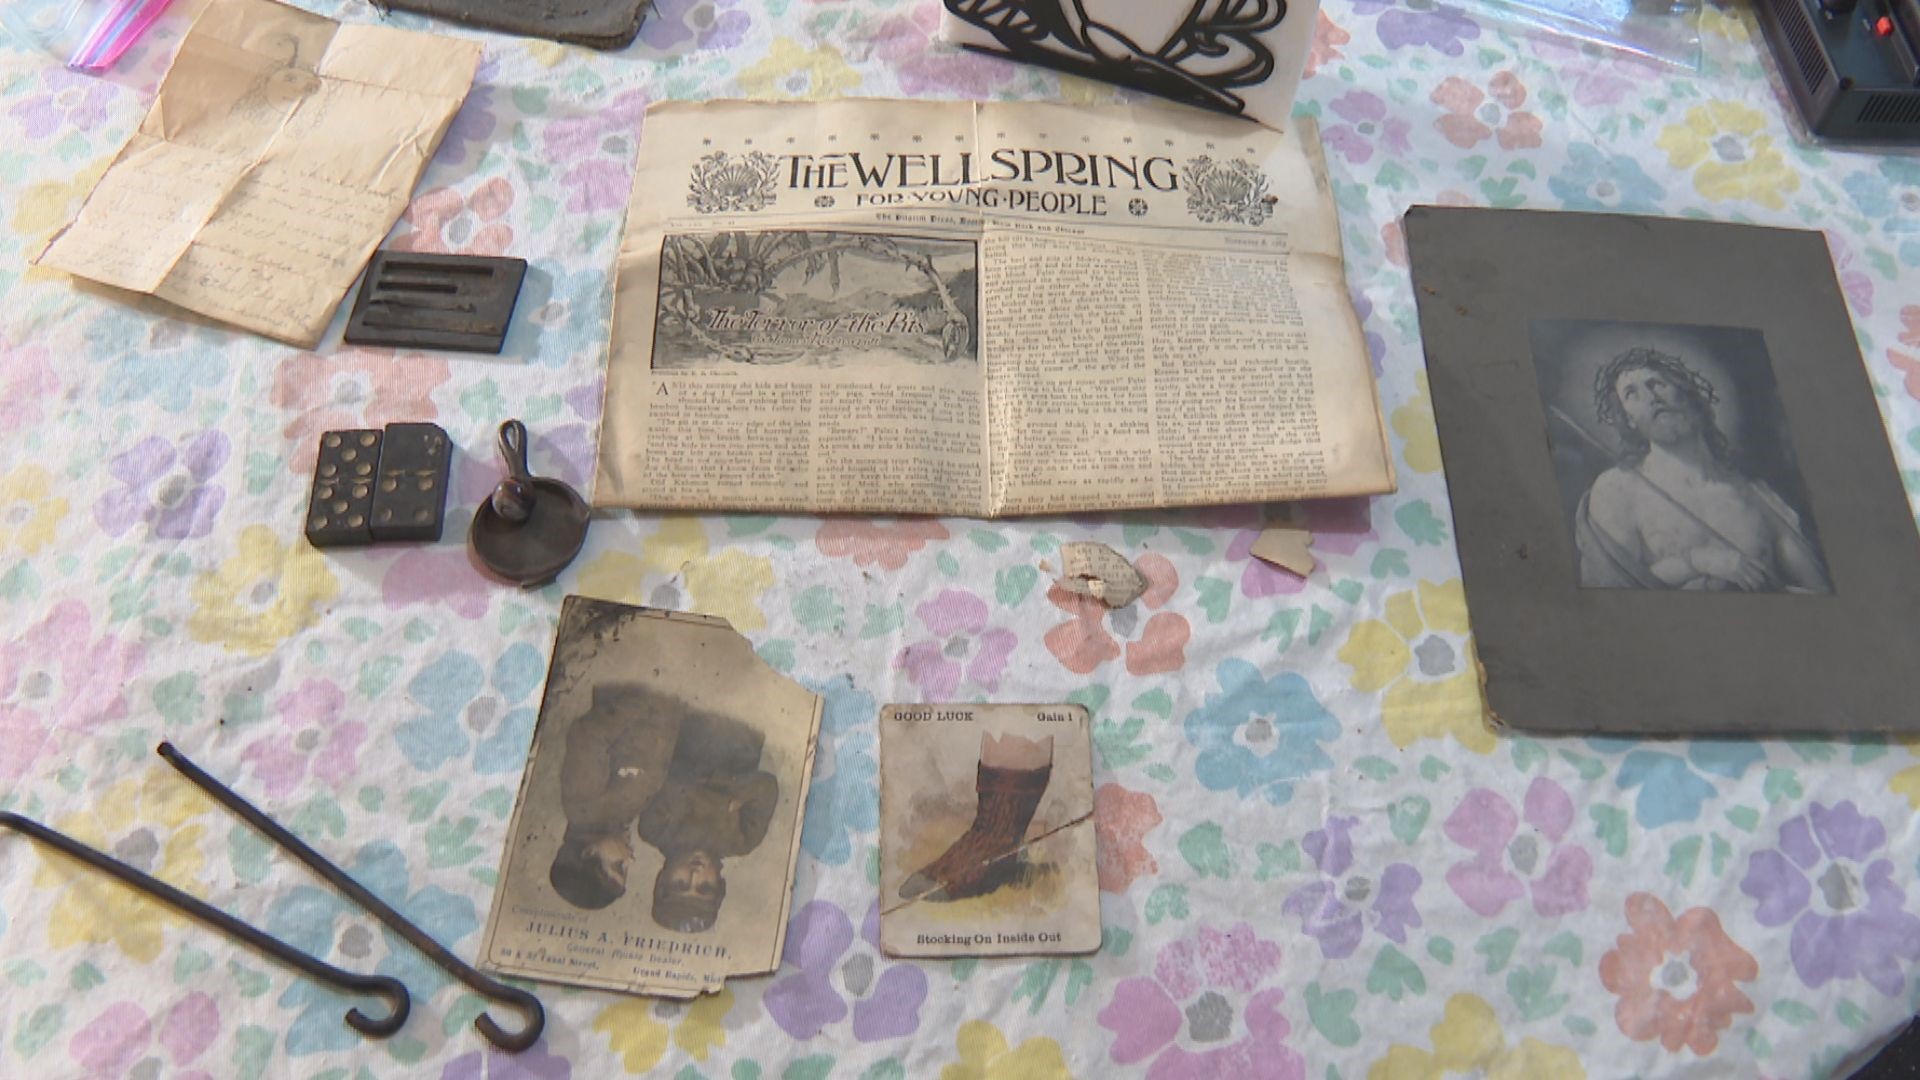 During a repair project, artifacts and newspapers dating back to 1915 were found in Jesse Leitch's home.